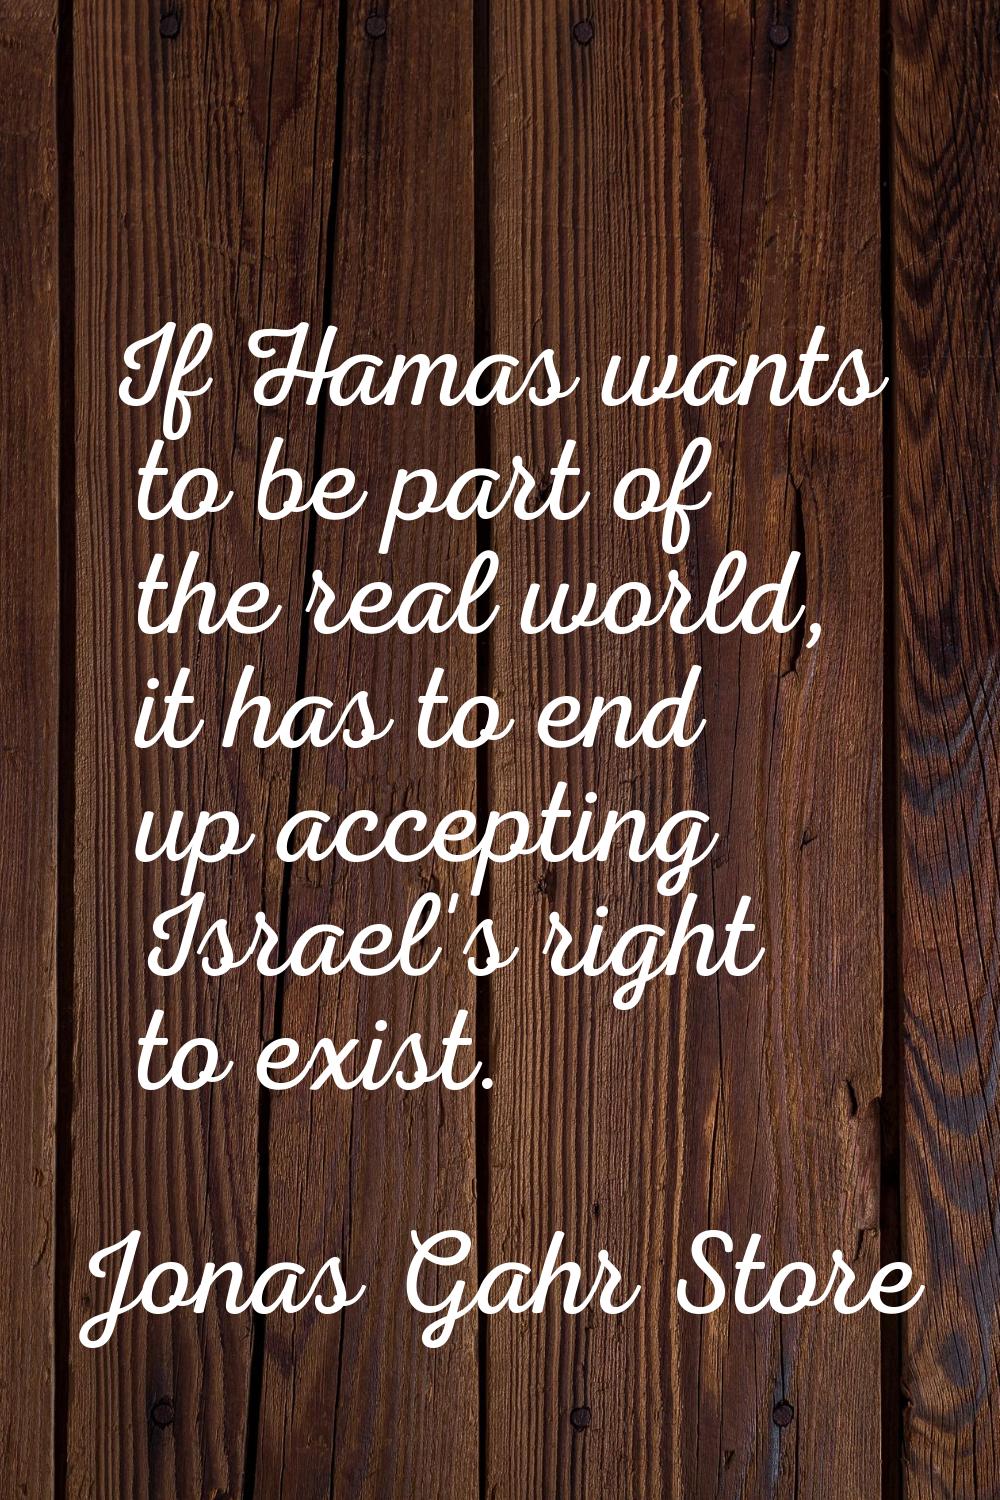 If Hamas wants to be part of the real world, it has to end up accepting Israel's right to exist.